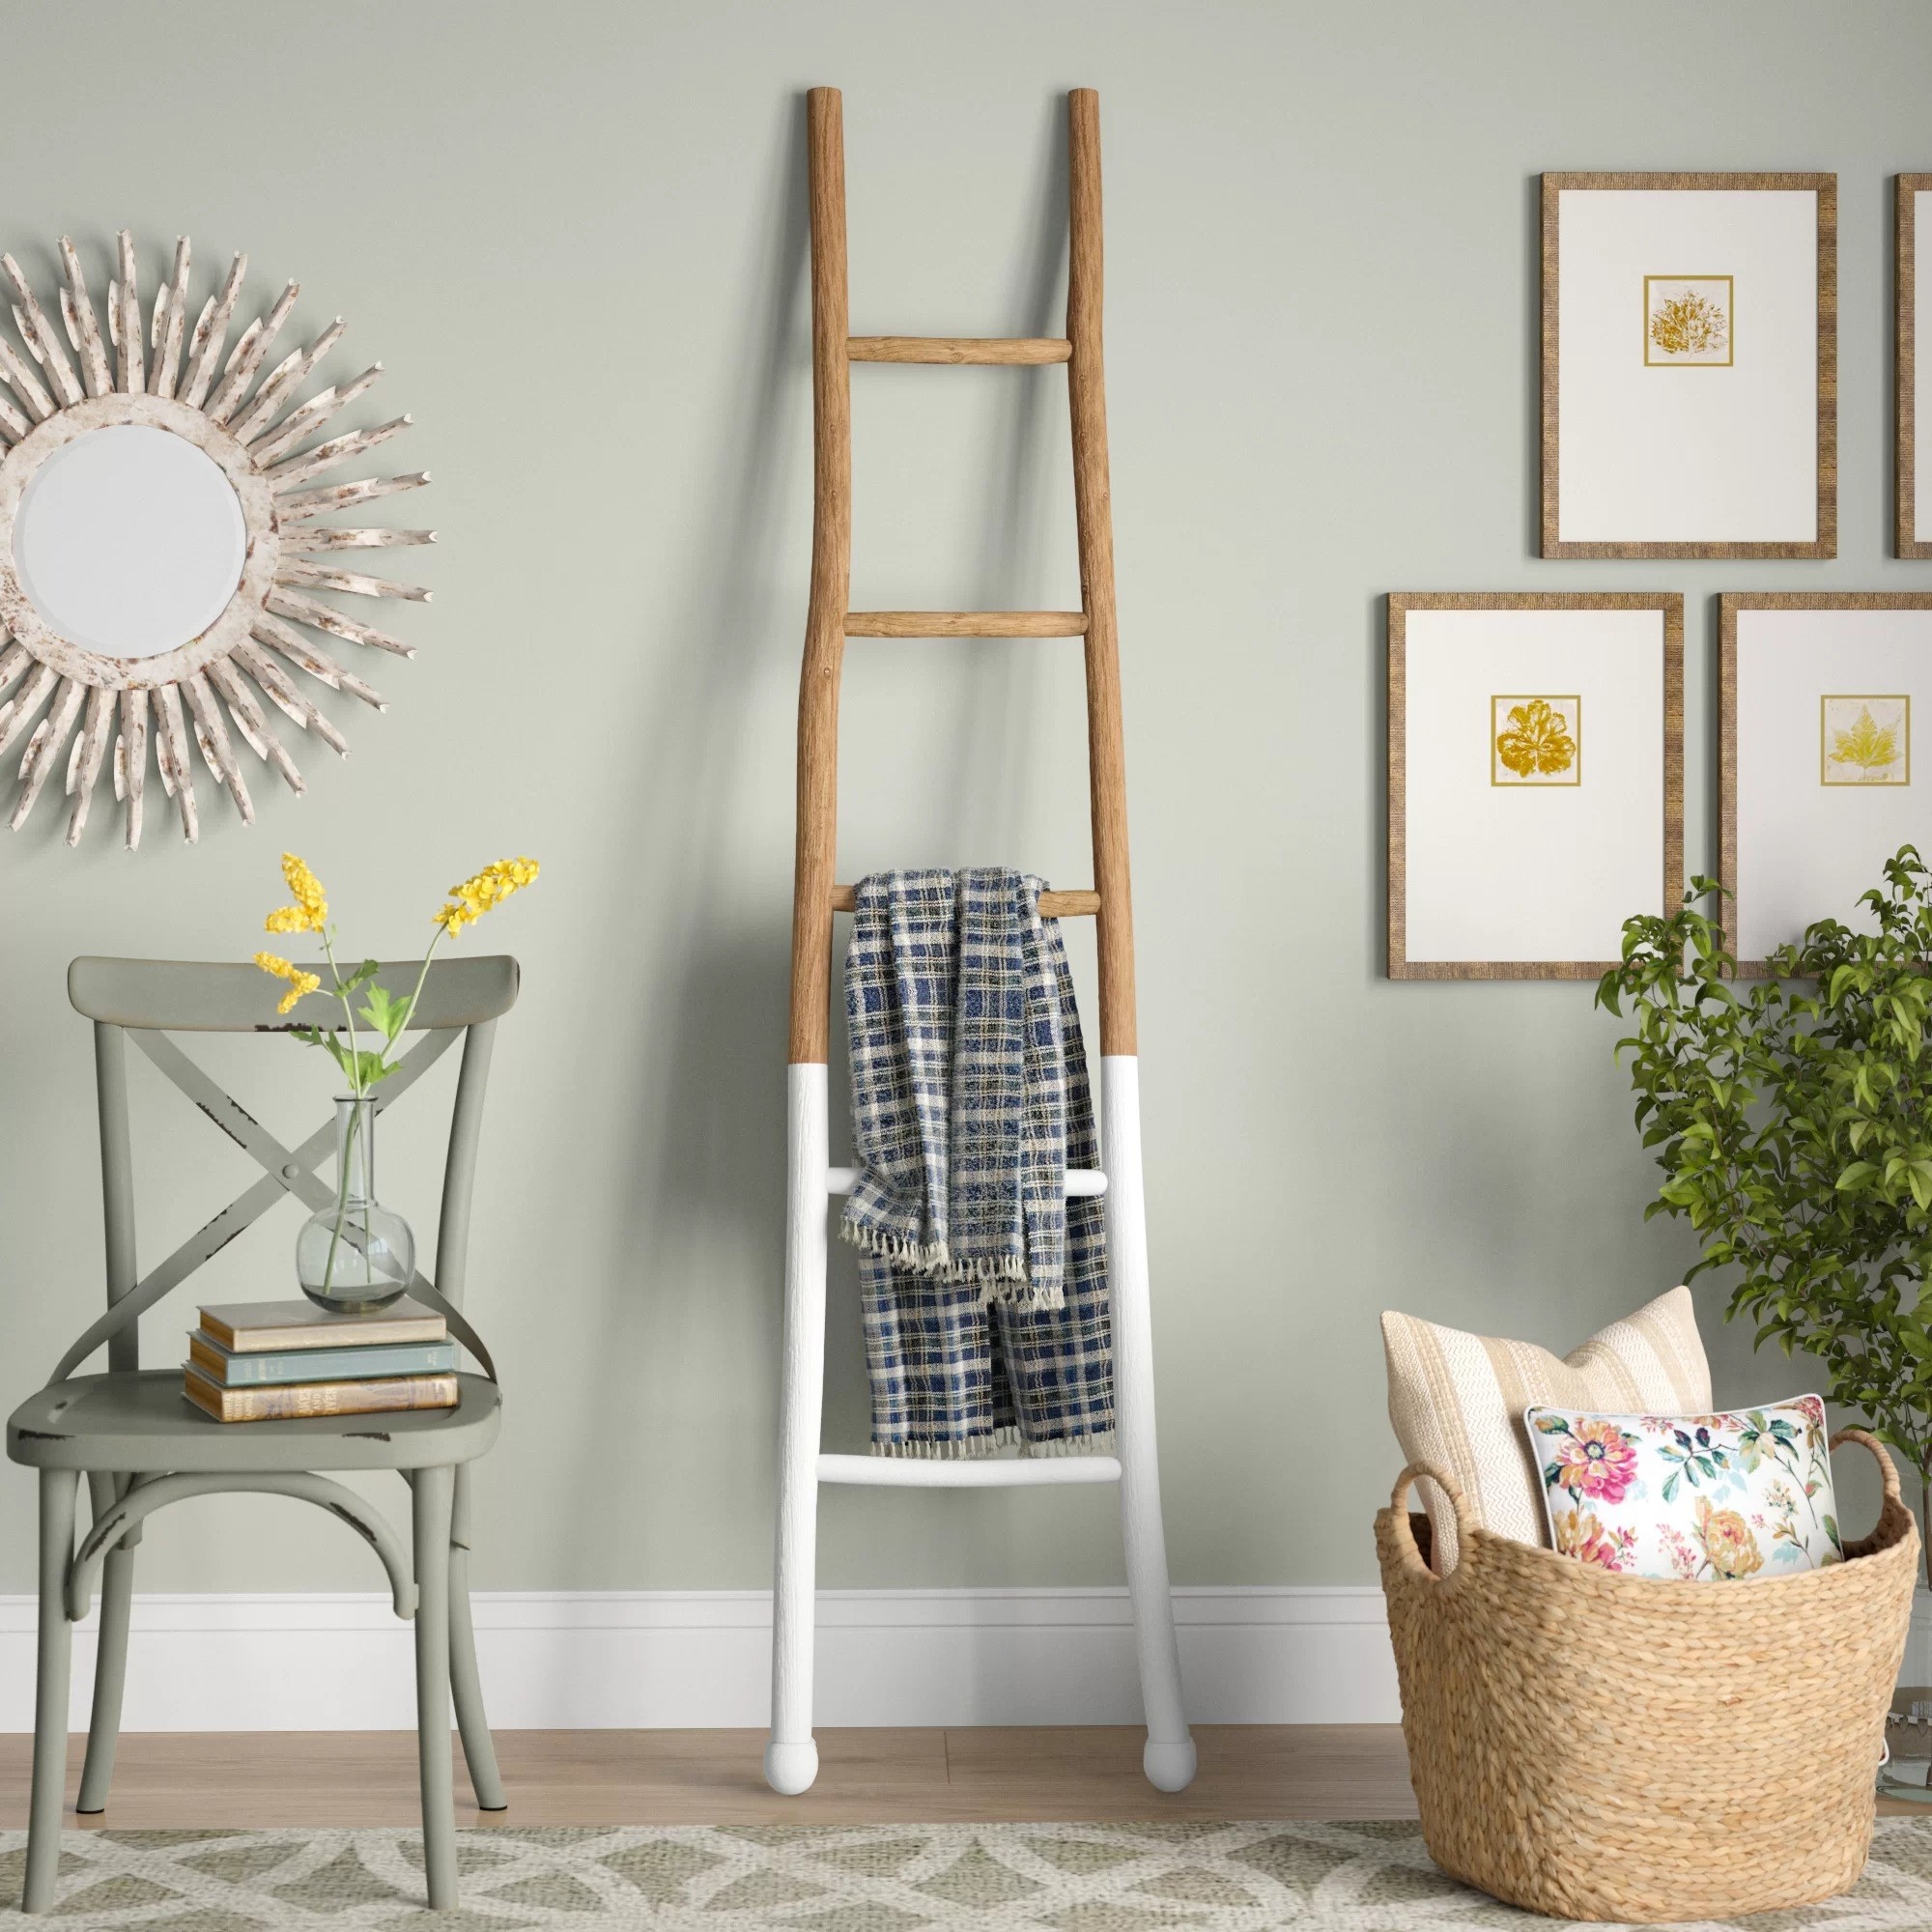 The ladder with a white dipped bottom holding a blanket in a living room